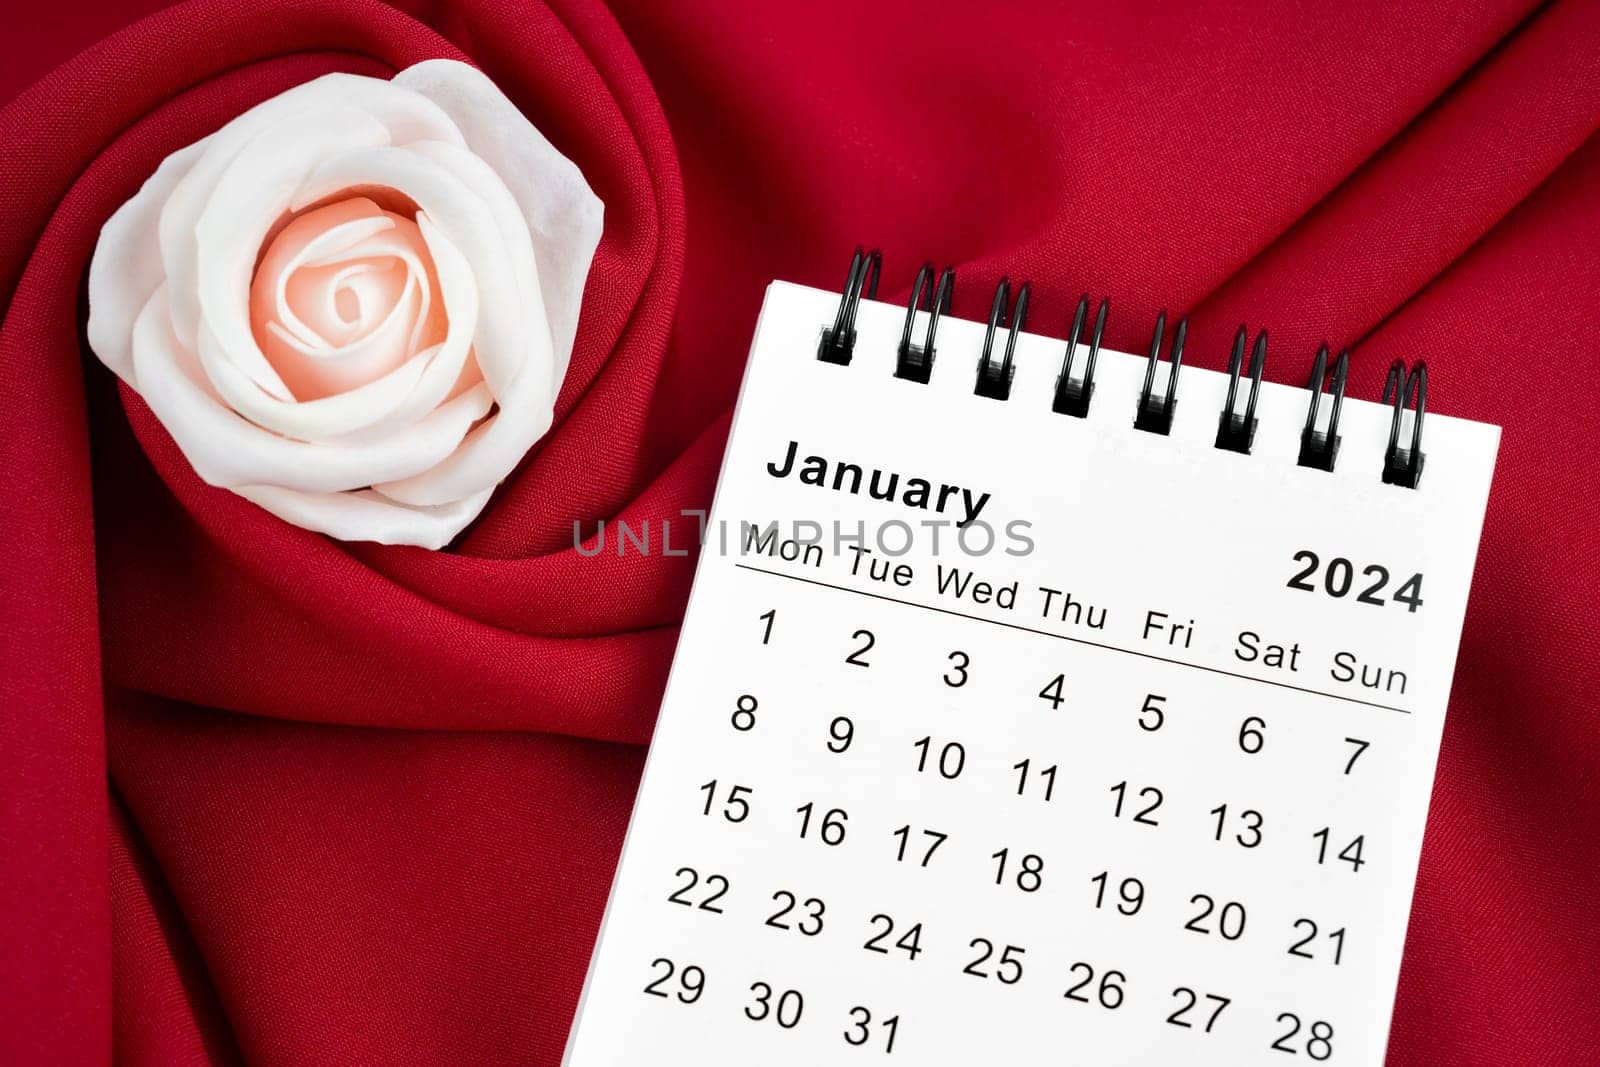 The January 2024 desk calendar and pink rose on red textile background. by Gamjai